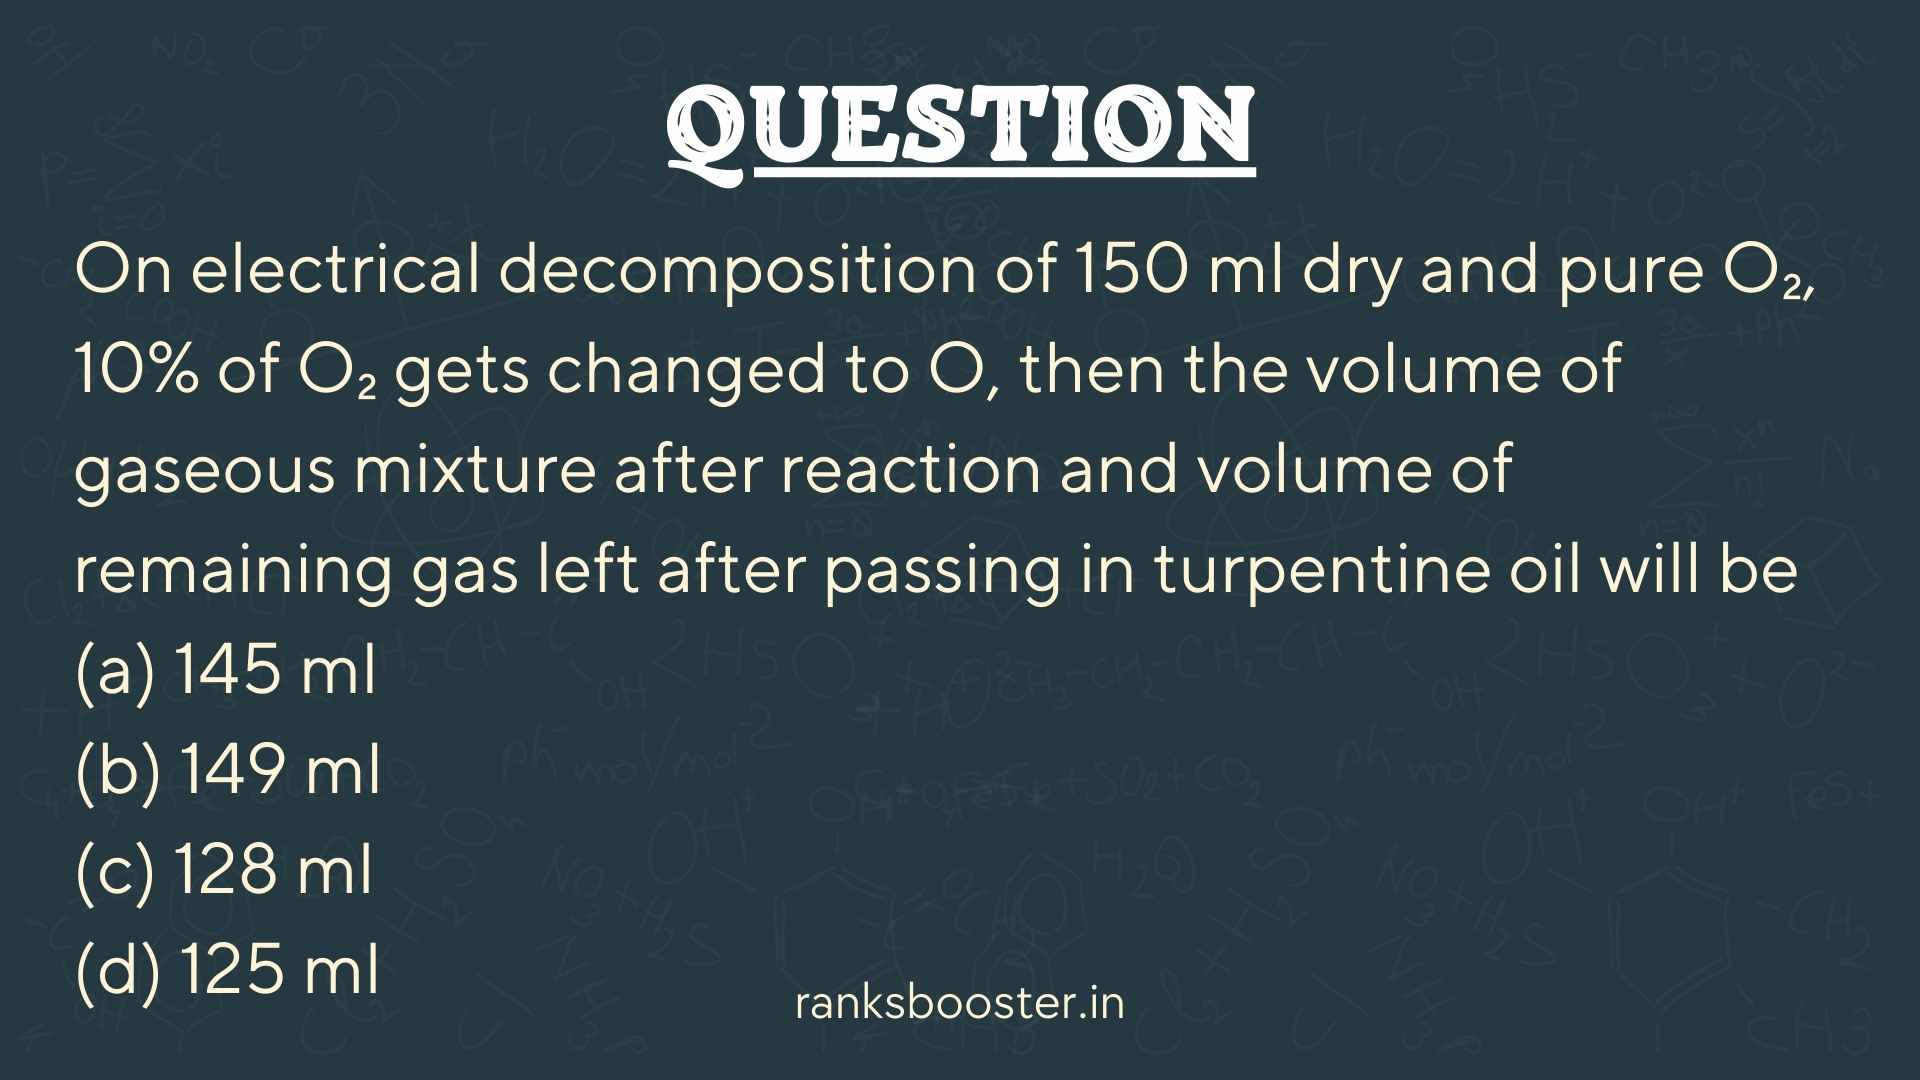 Question: On electrical decomposition of 150 ml dry and pure O₂, 10% of O₂ gets changed to O, then the volume of gaseous mixture after reaction and volume of remaining gas left after passing in turpentine oil will be (a) 145 ml (b) 149 ml (c) 128 ml (d) 125 ml